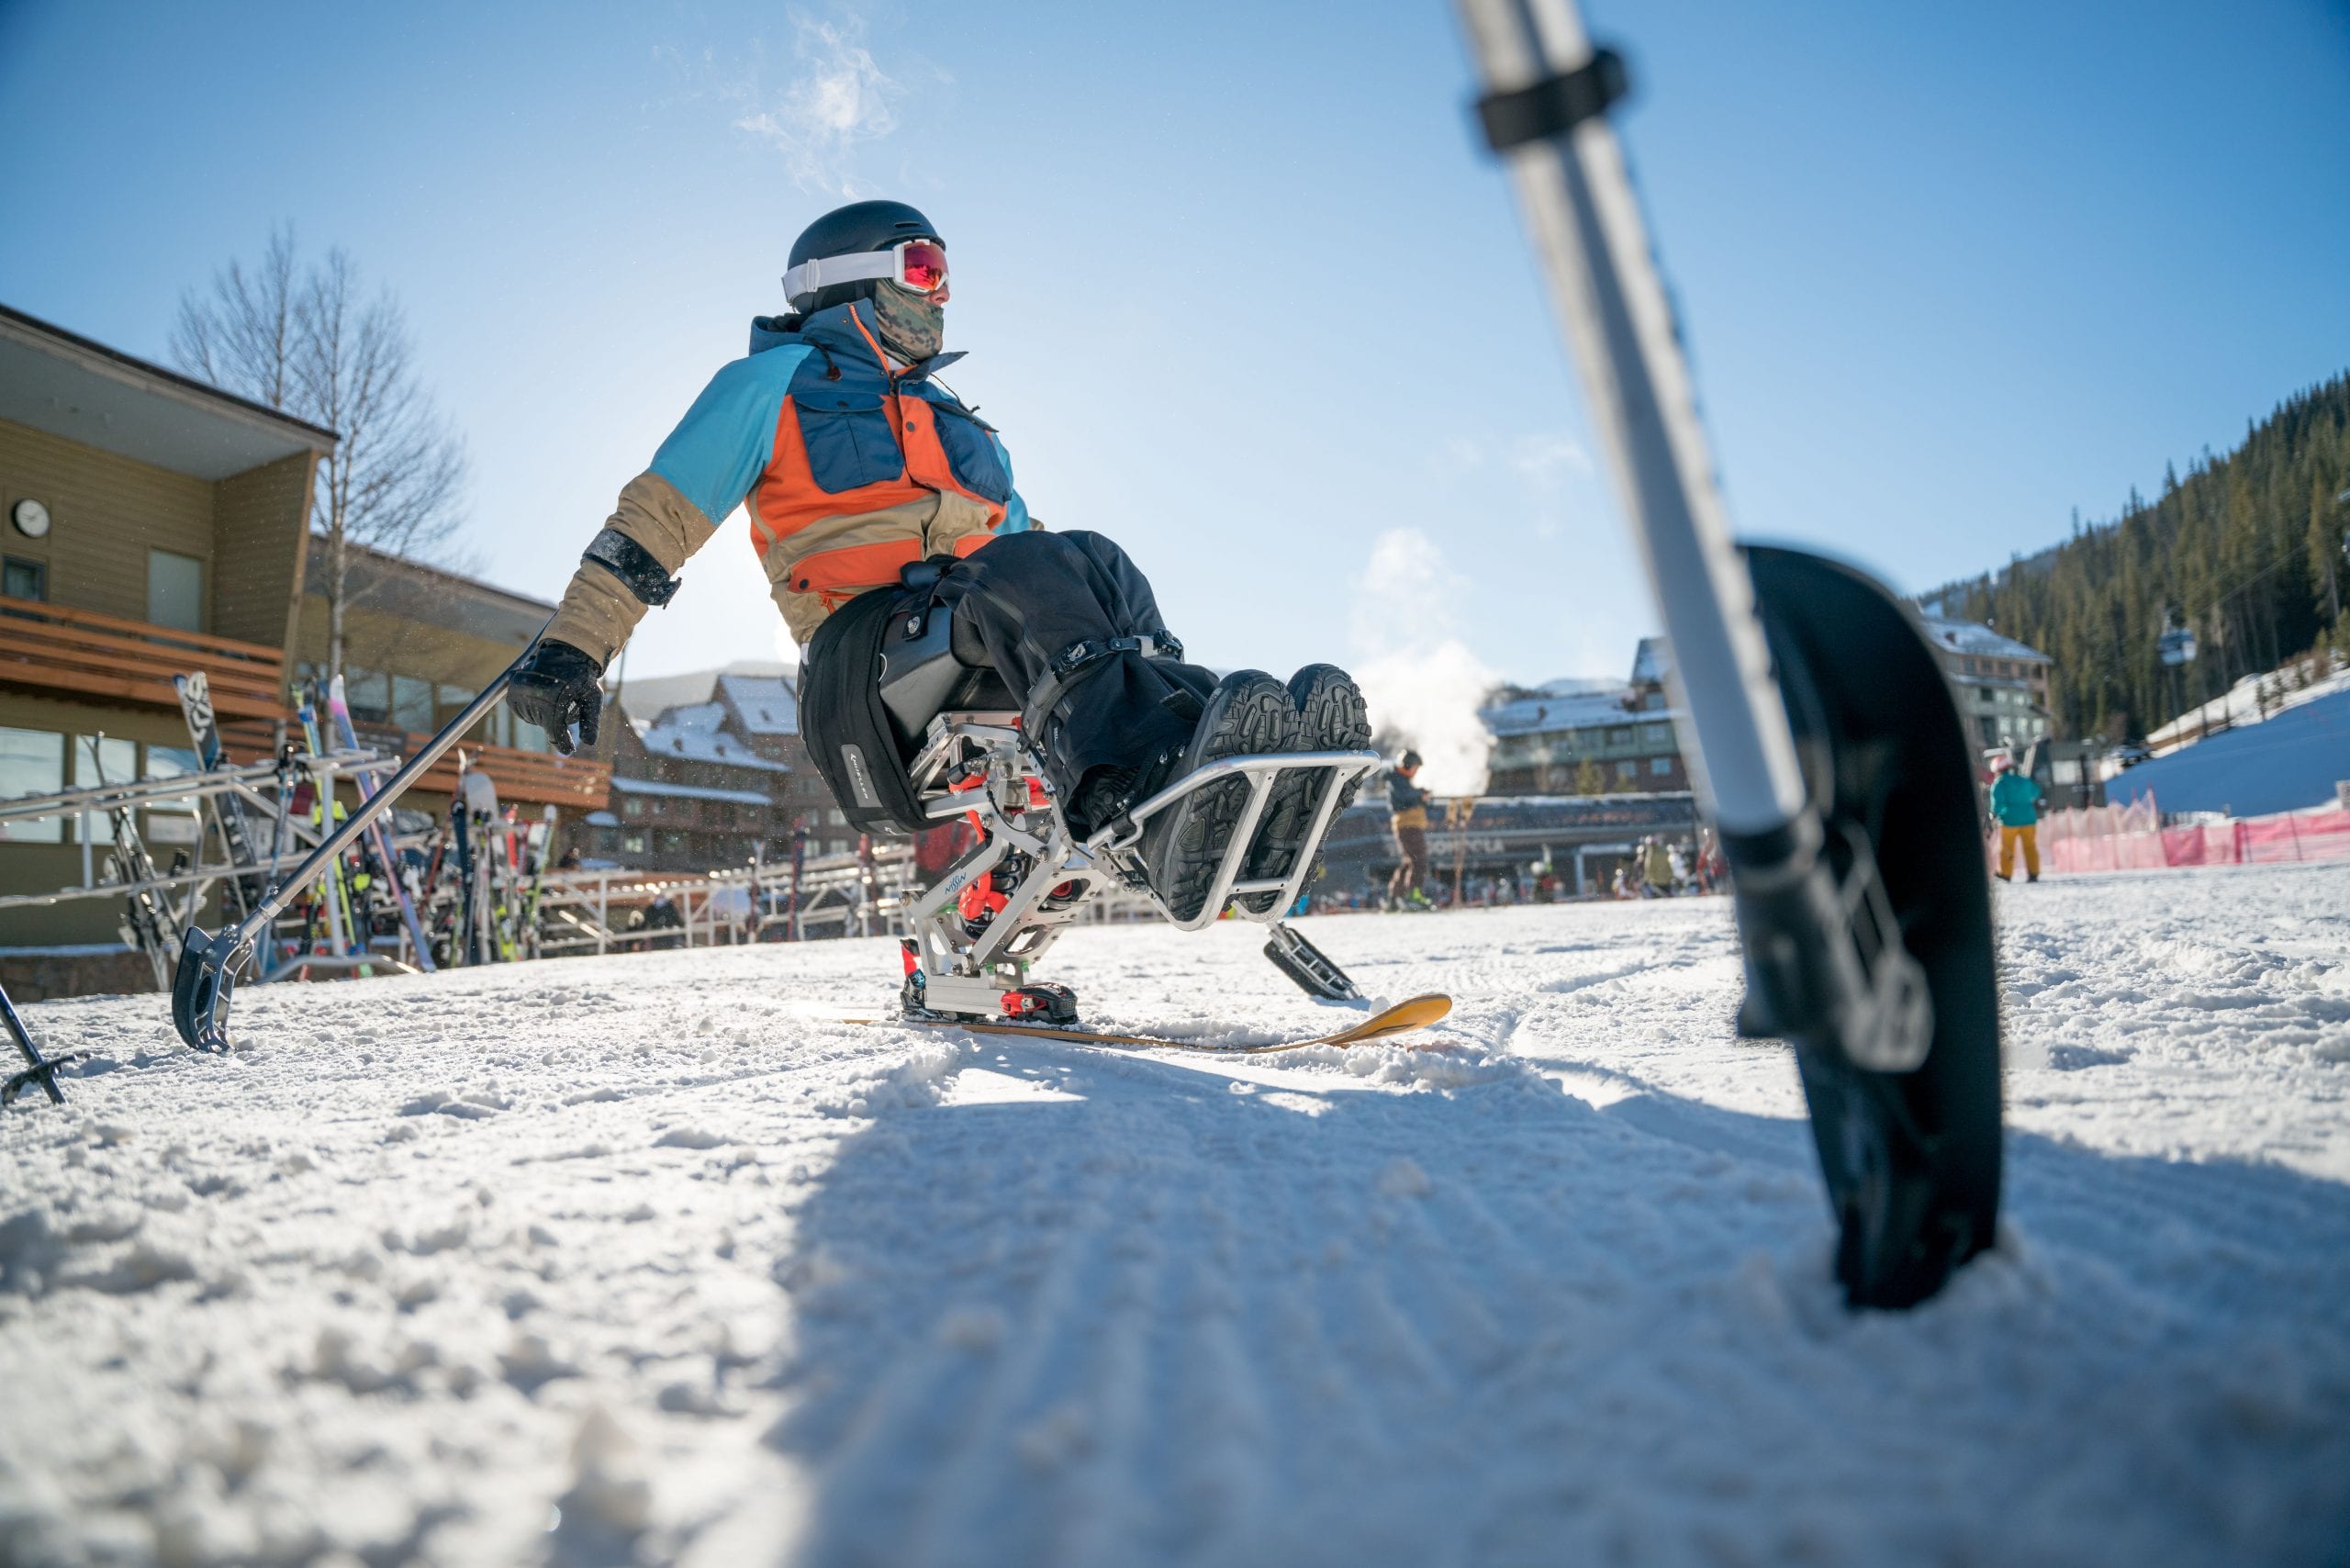 A recent High Fives Foundation event in Winter Park , Colorado: High Five The Hill 2021.